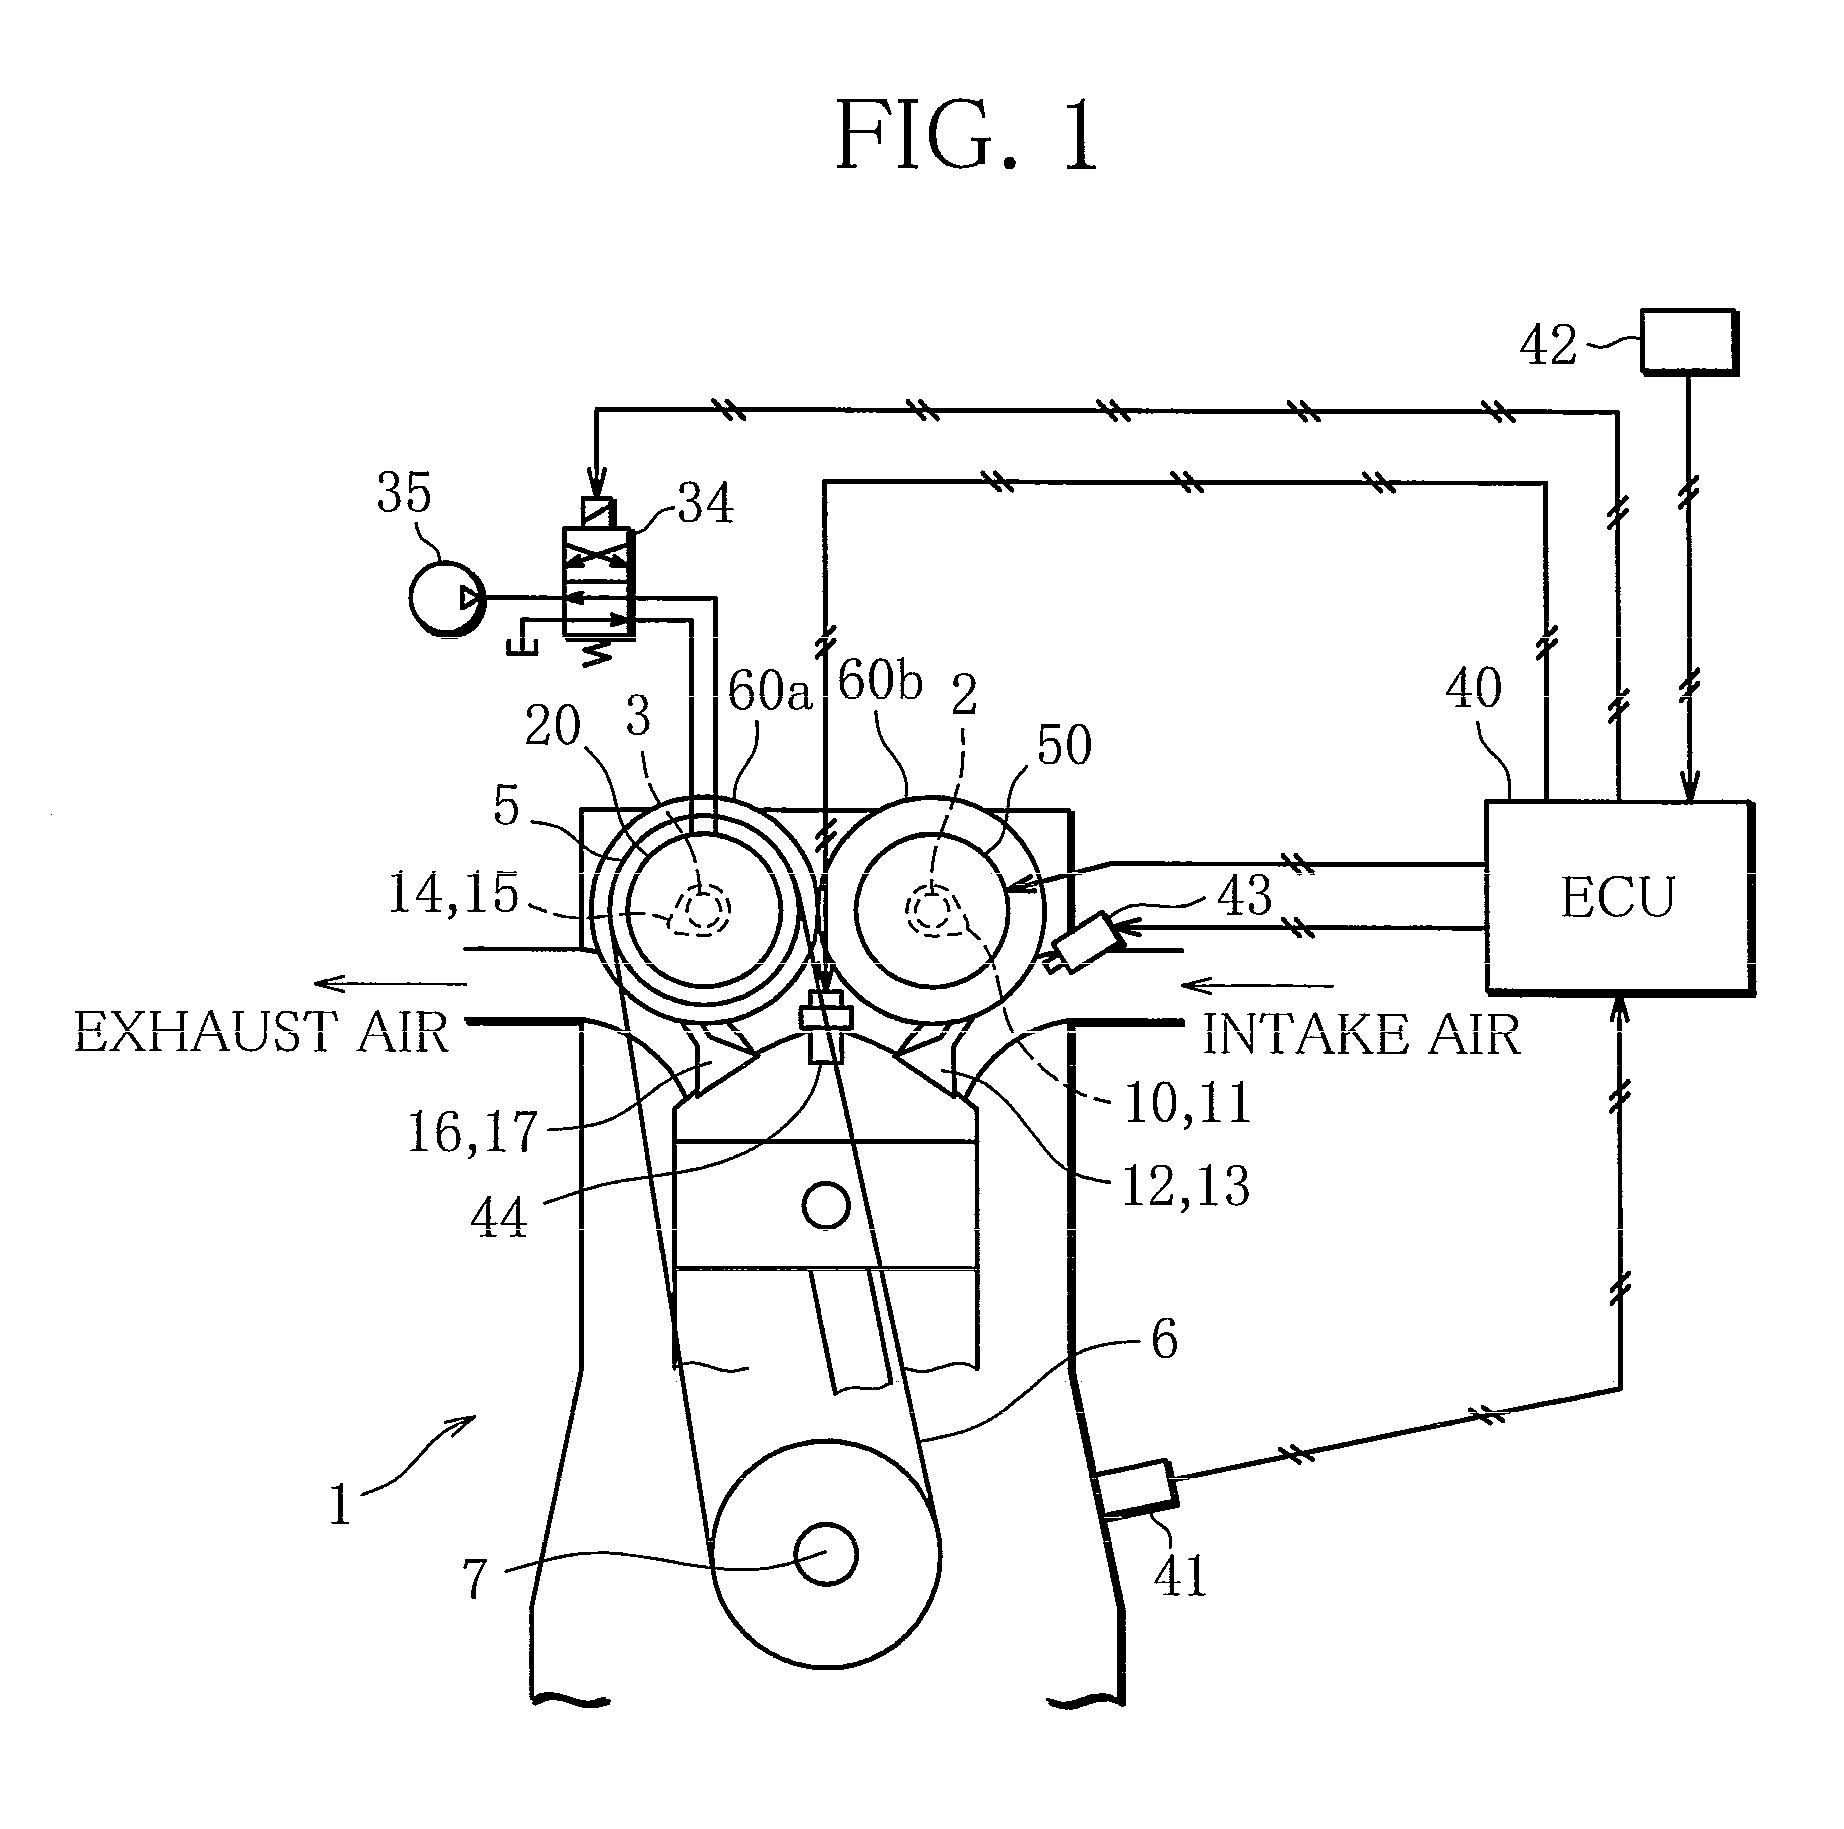 Internal combustion engine with variable valve gear